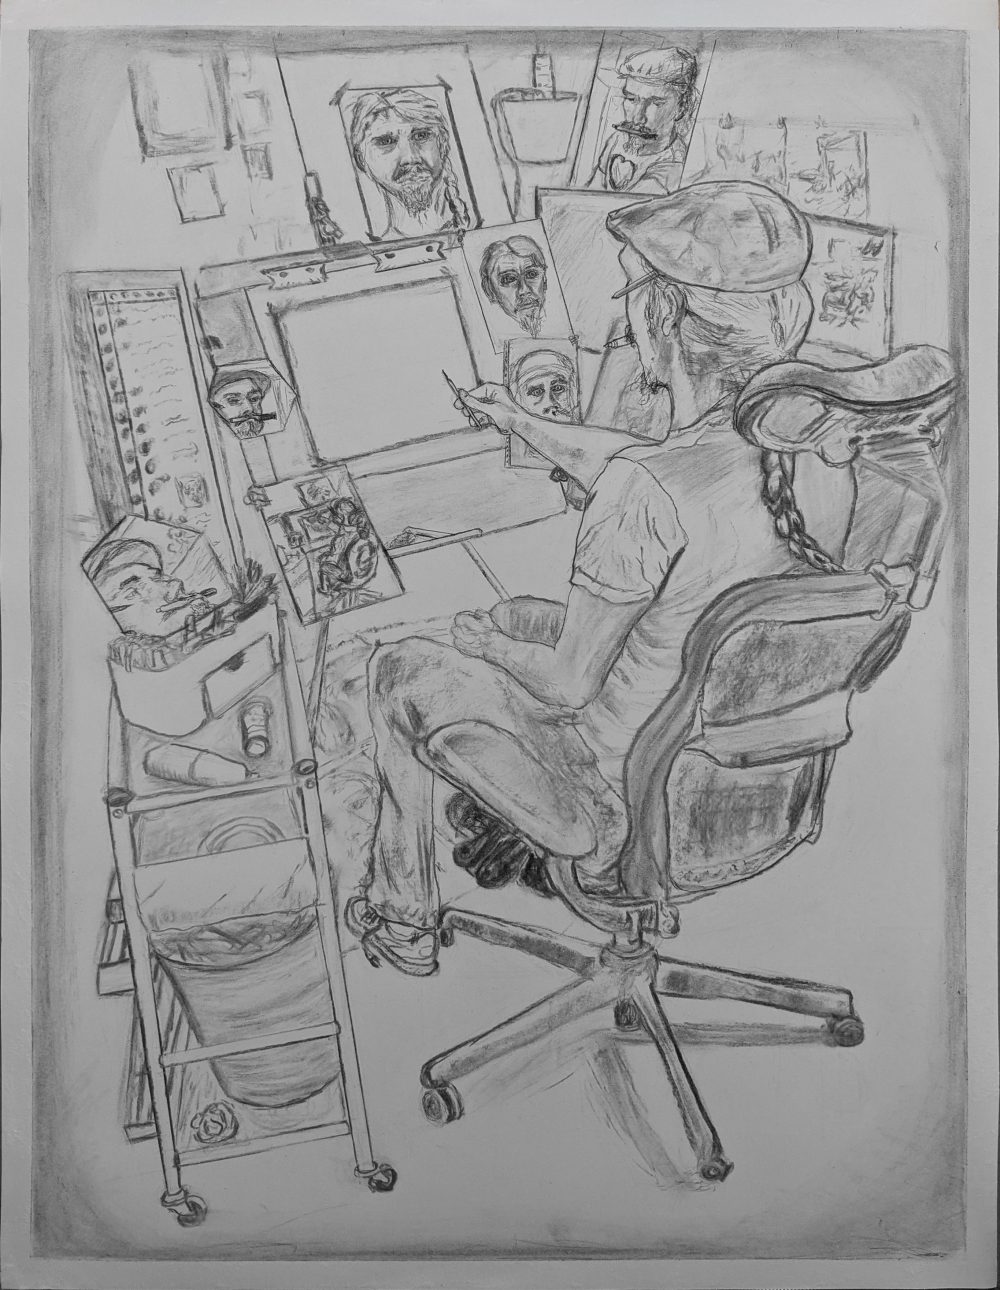 Artist with pencil at canvas with various portraits of (and mirrors angled at) their face, as well as a duplicate of this drawing inside this drawing... there's a lot going on here.